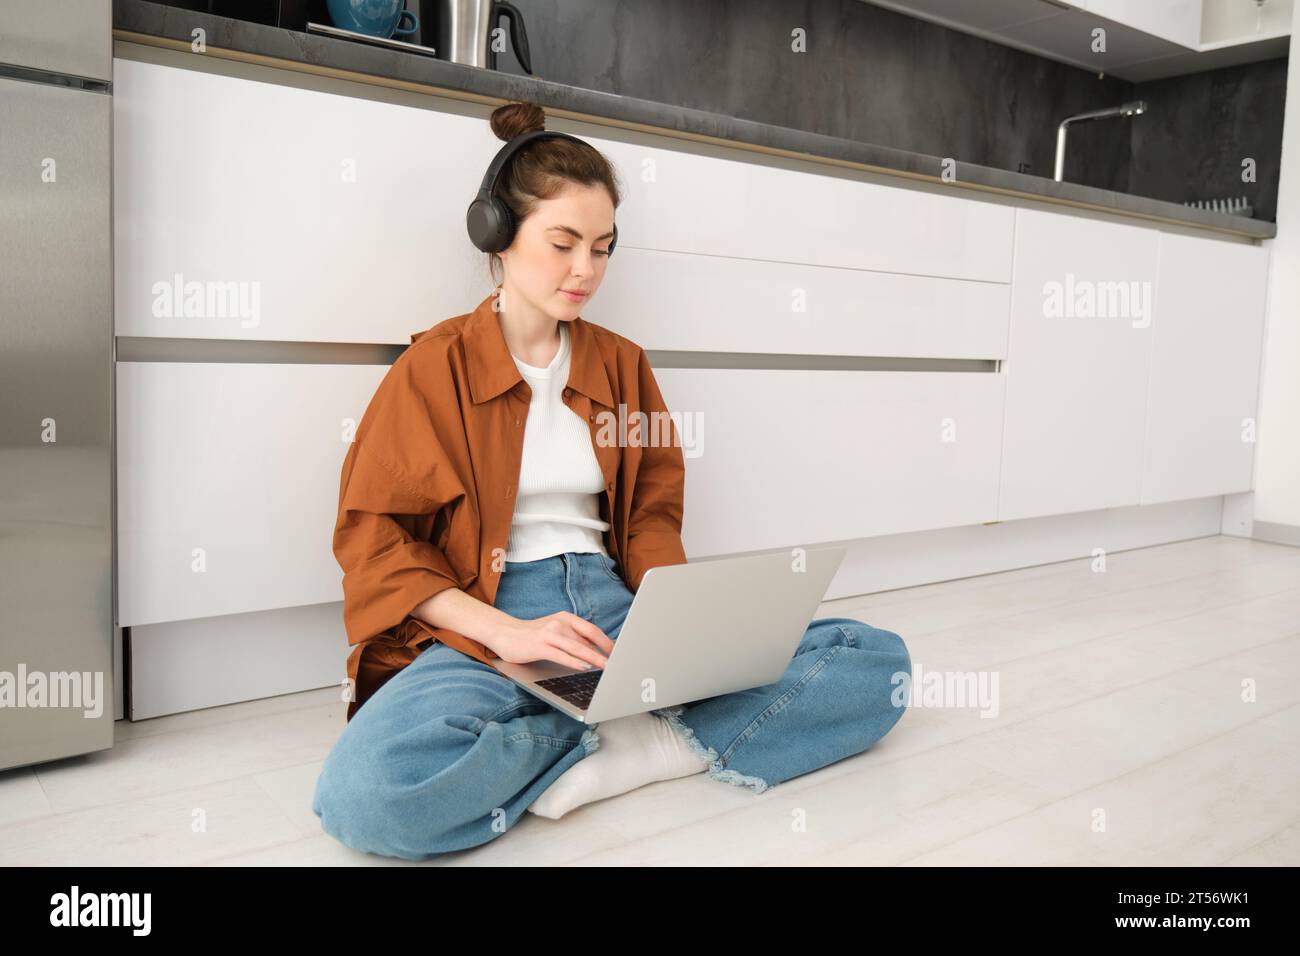 Young woman freelancer, working from home, student sitting with laptop on kitchen floor, wearing headphones, typing on computer. Stock Photo